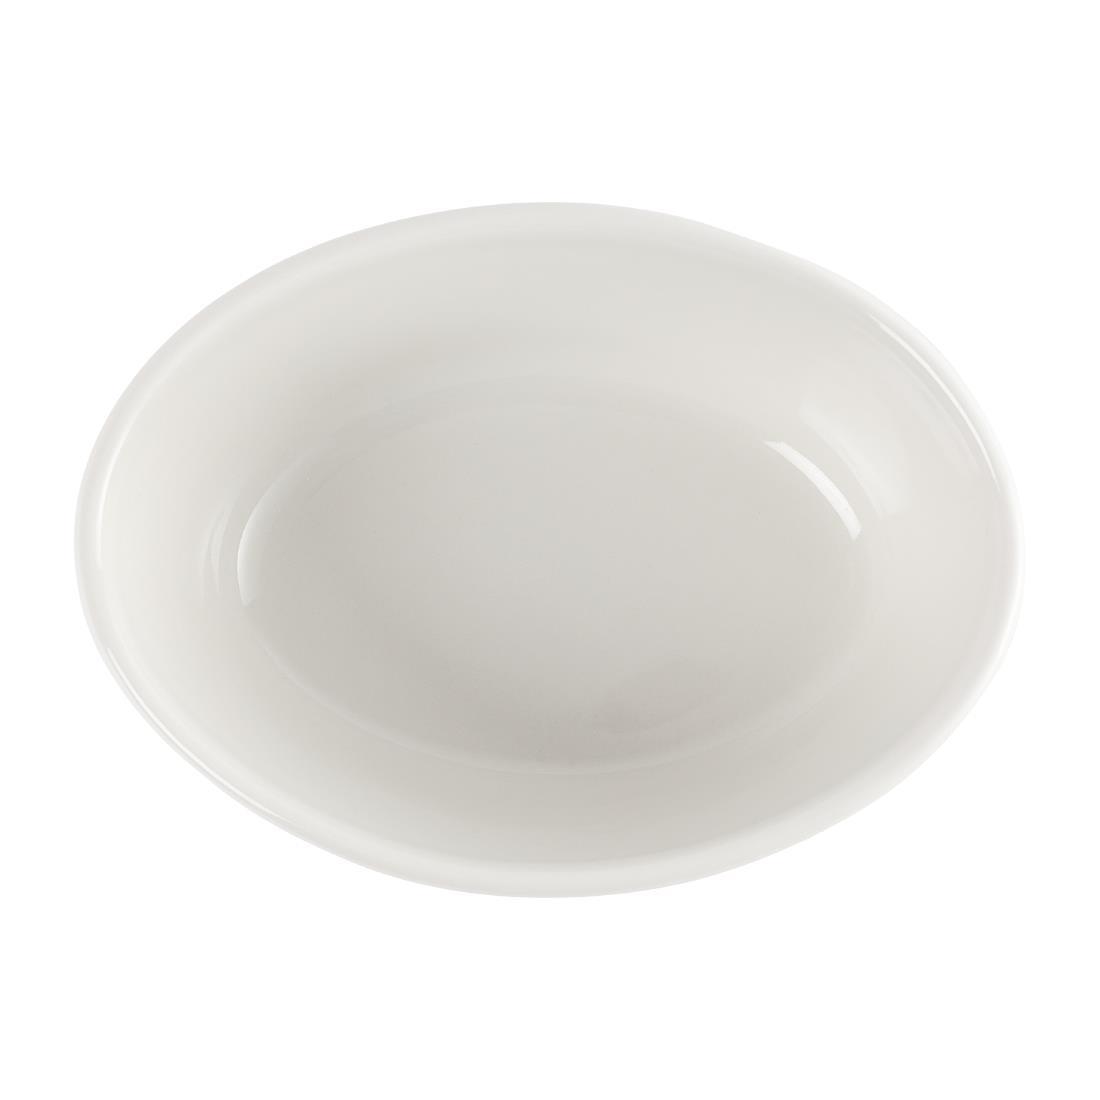 Churchill Oval Pie Dishes 150mm (Pack of 12) - P776  - 2